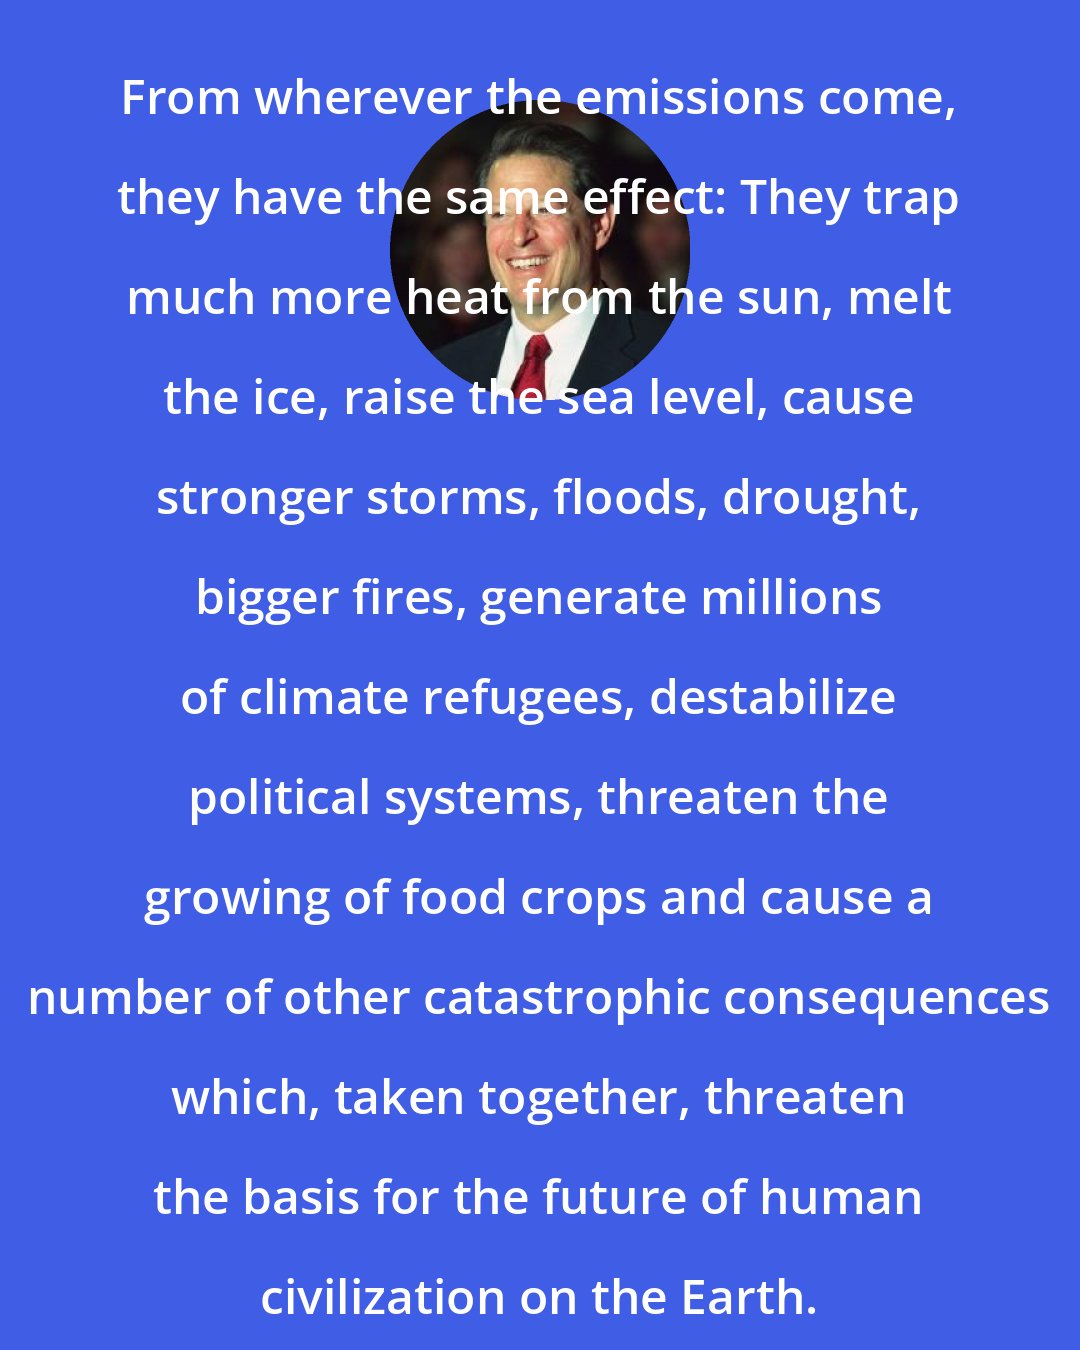 Al Gore: From wherever the emissions come, they have the same effect: They trap much more heat from the sun, melt the ice, raise the sea level, cause stronger storms, floods, drought, bigger fires, generate millions of climate refugees, destabilize political systems, threaten the growing of food crops and cause a number of other catastrophic consequences which, taken together, threaten the basis for the future of human civilization on the Earth.